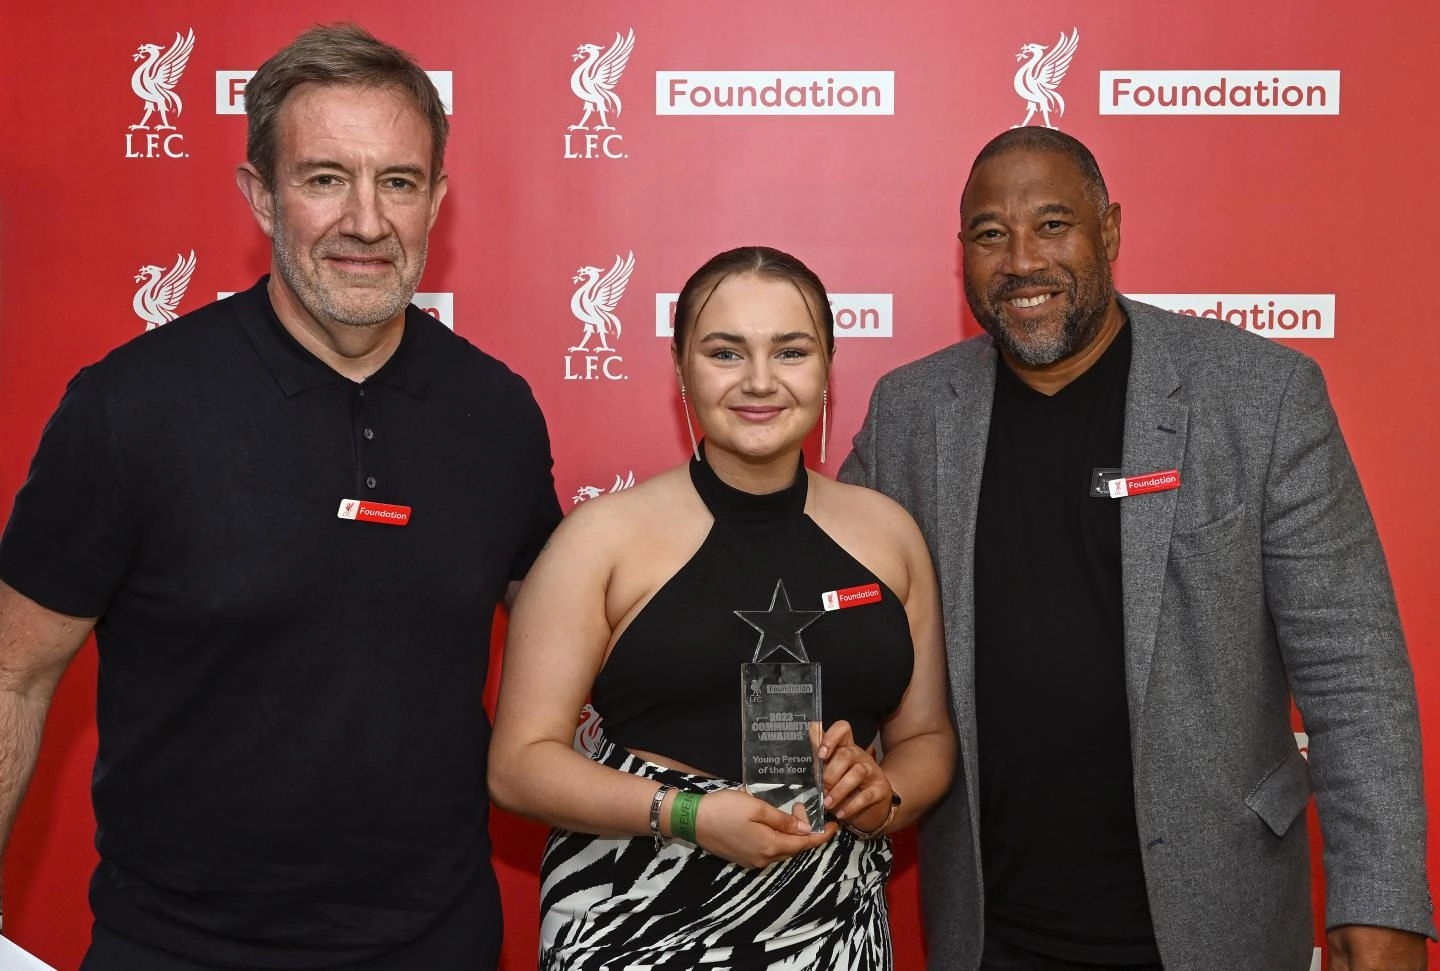 Young Person of the Year Award – Aimee Lynskey 